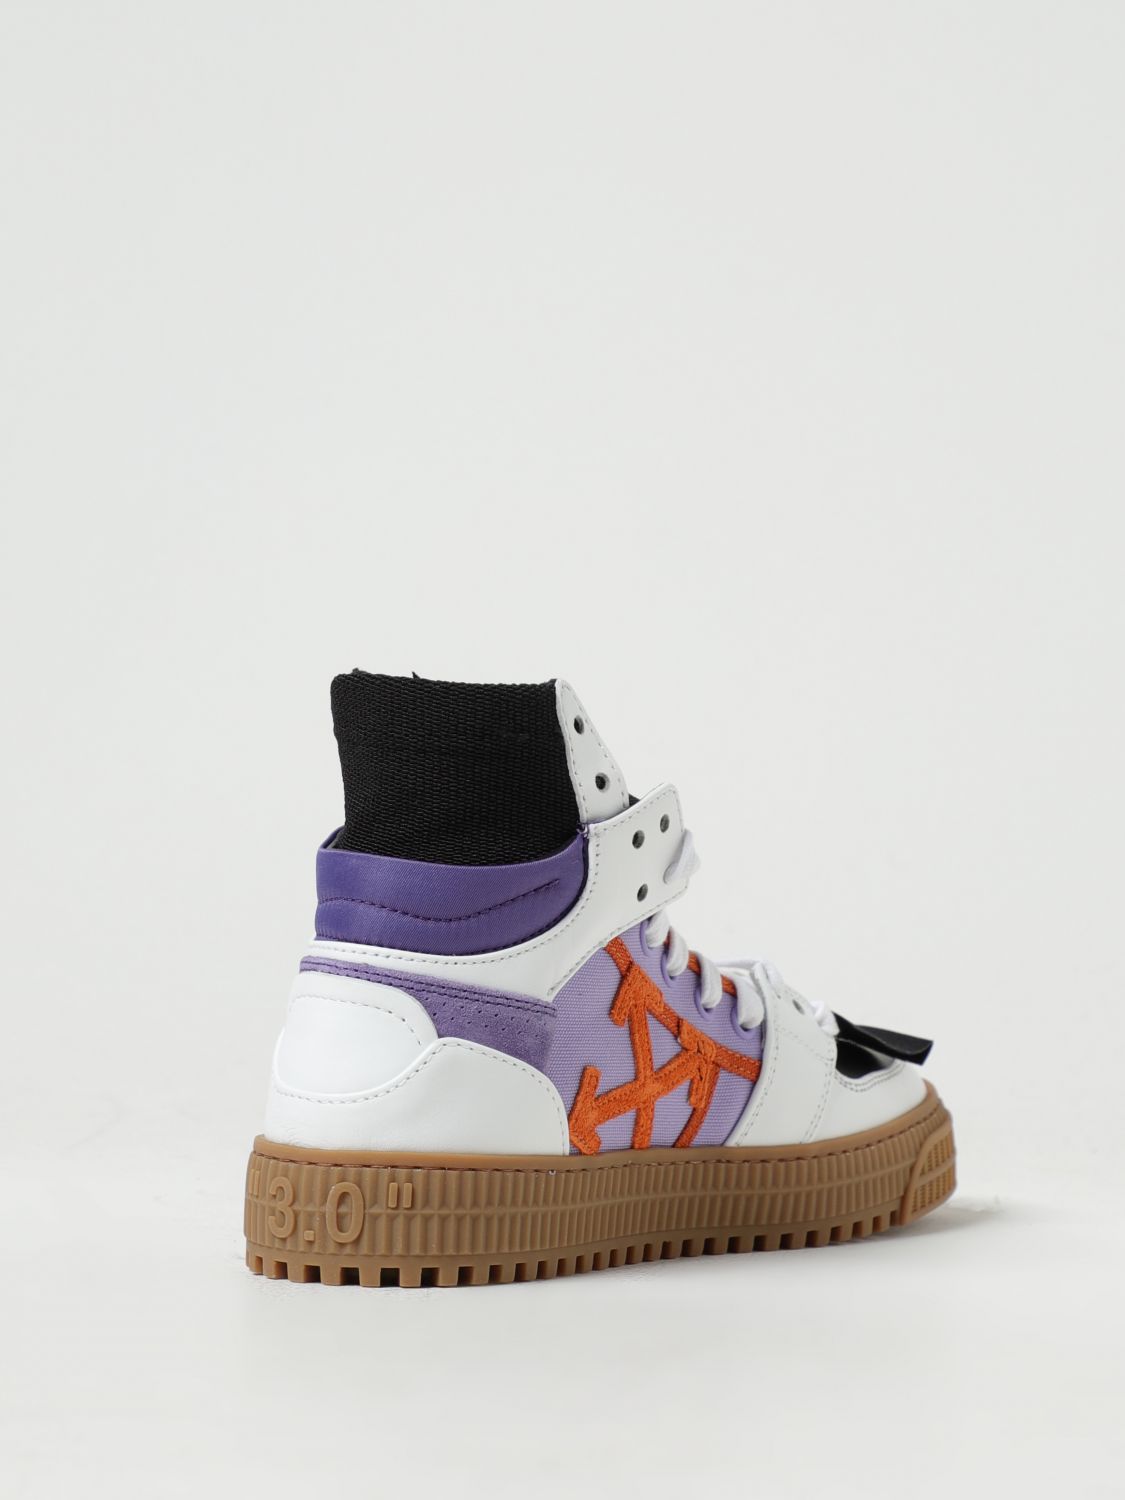 Off-White™ Italian-Made 3.0 “Off-Court” Sneakers